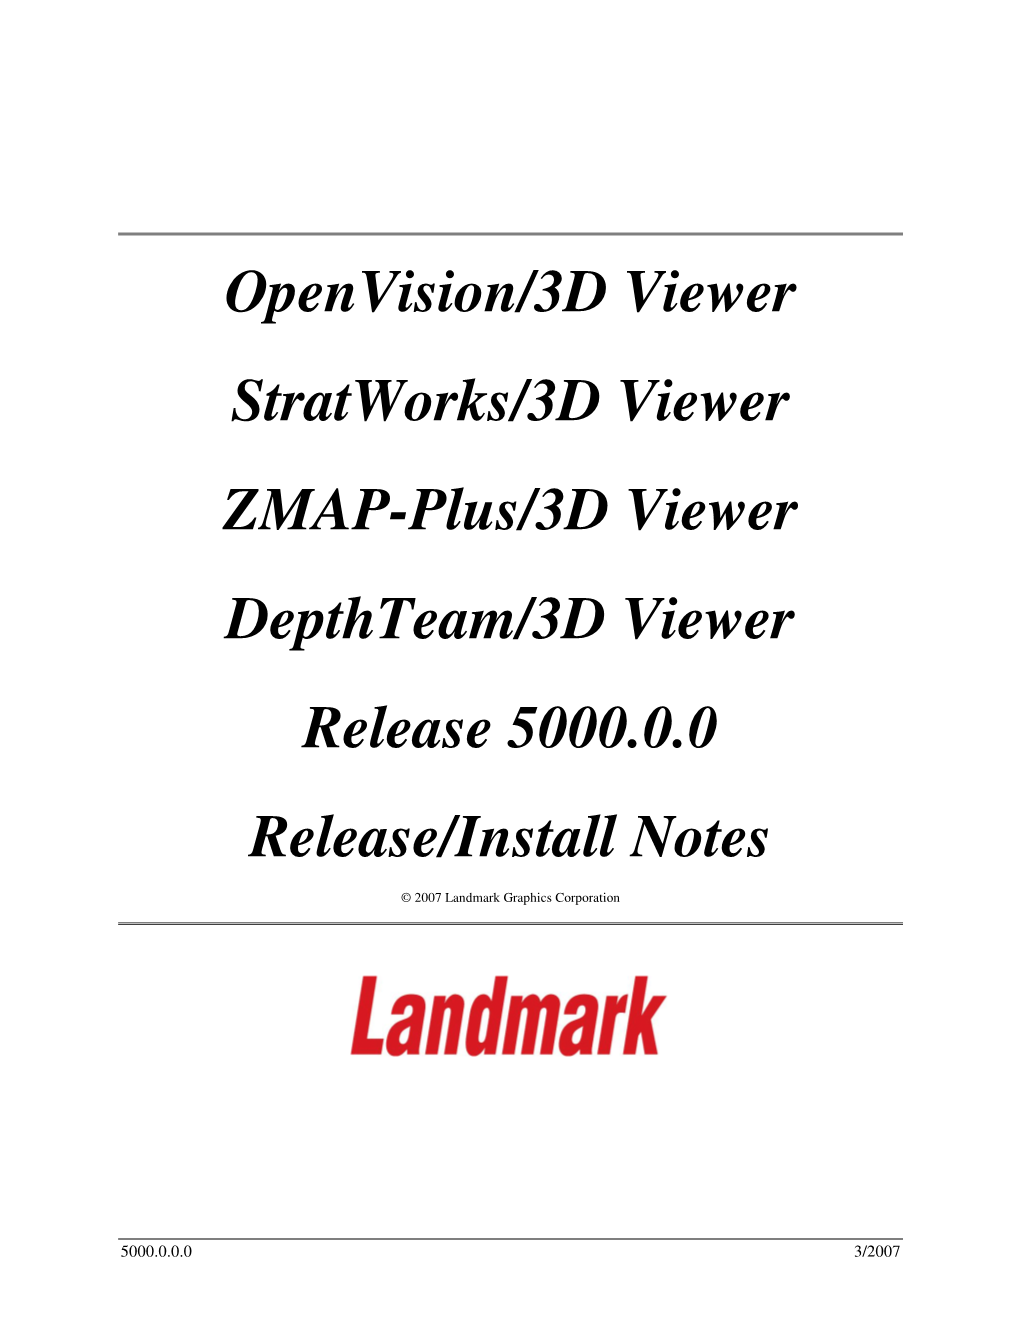 Openvision/3D Viewer Stratworks/3D Viewer ZMAP-Plus/3D Viewer Depthteam/3D Viewer Release 5000.0.0 Release/Install Notes